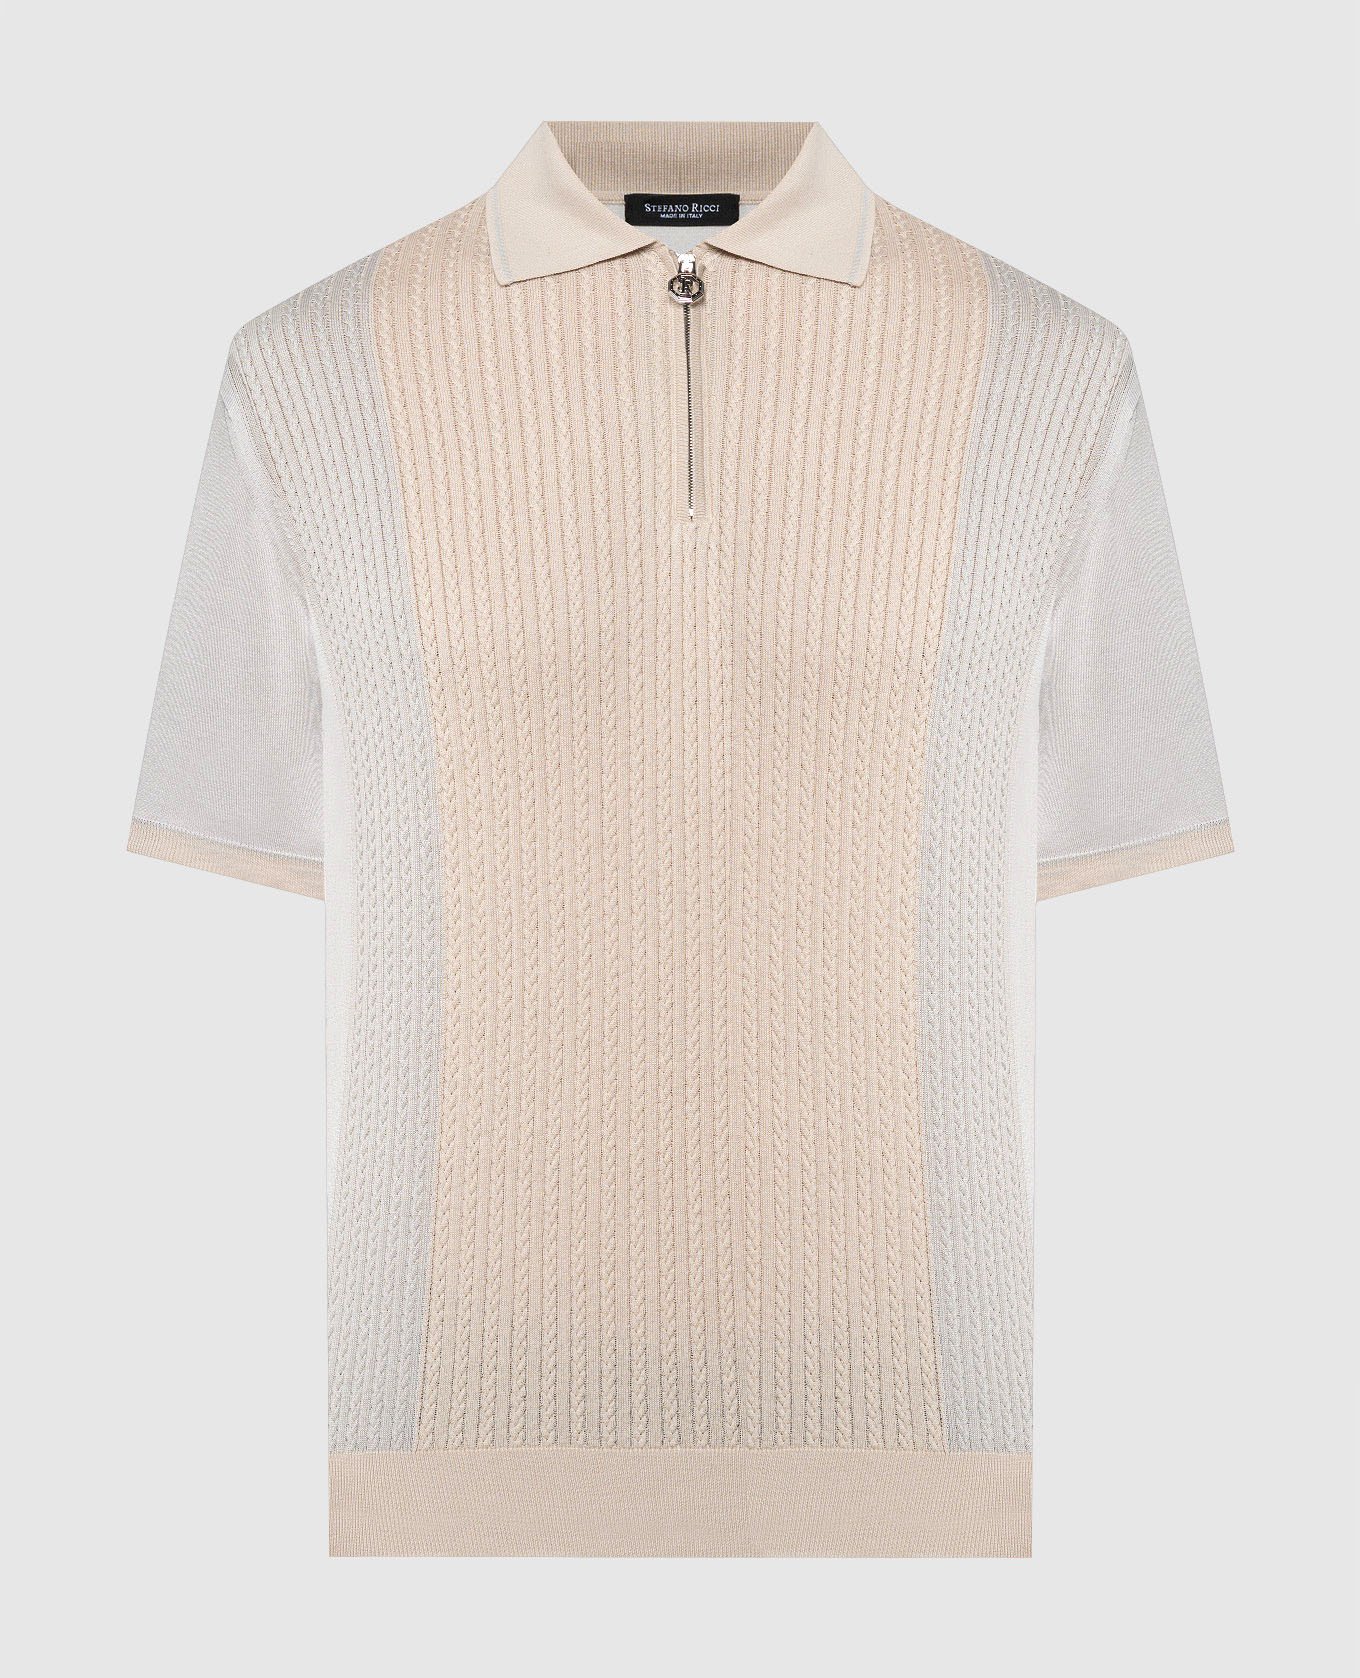 Gray polo shirt with textured patterned silk